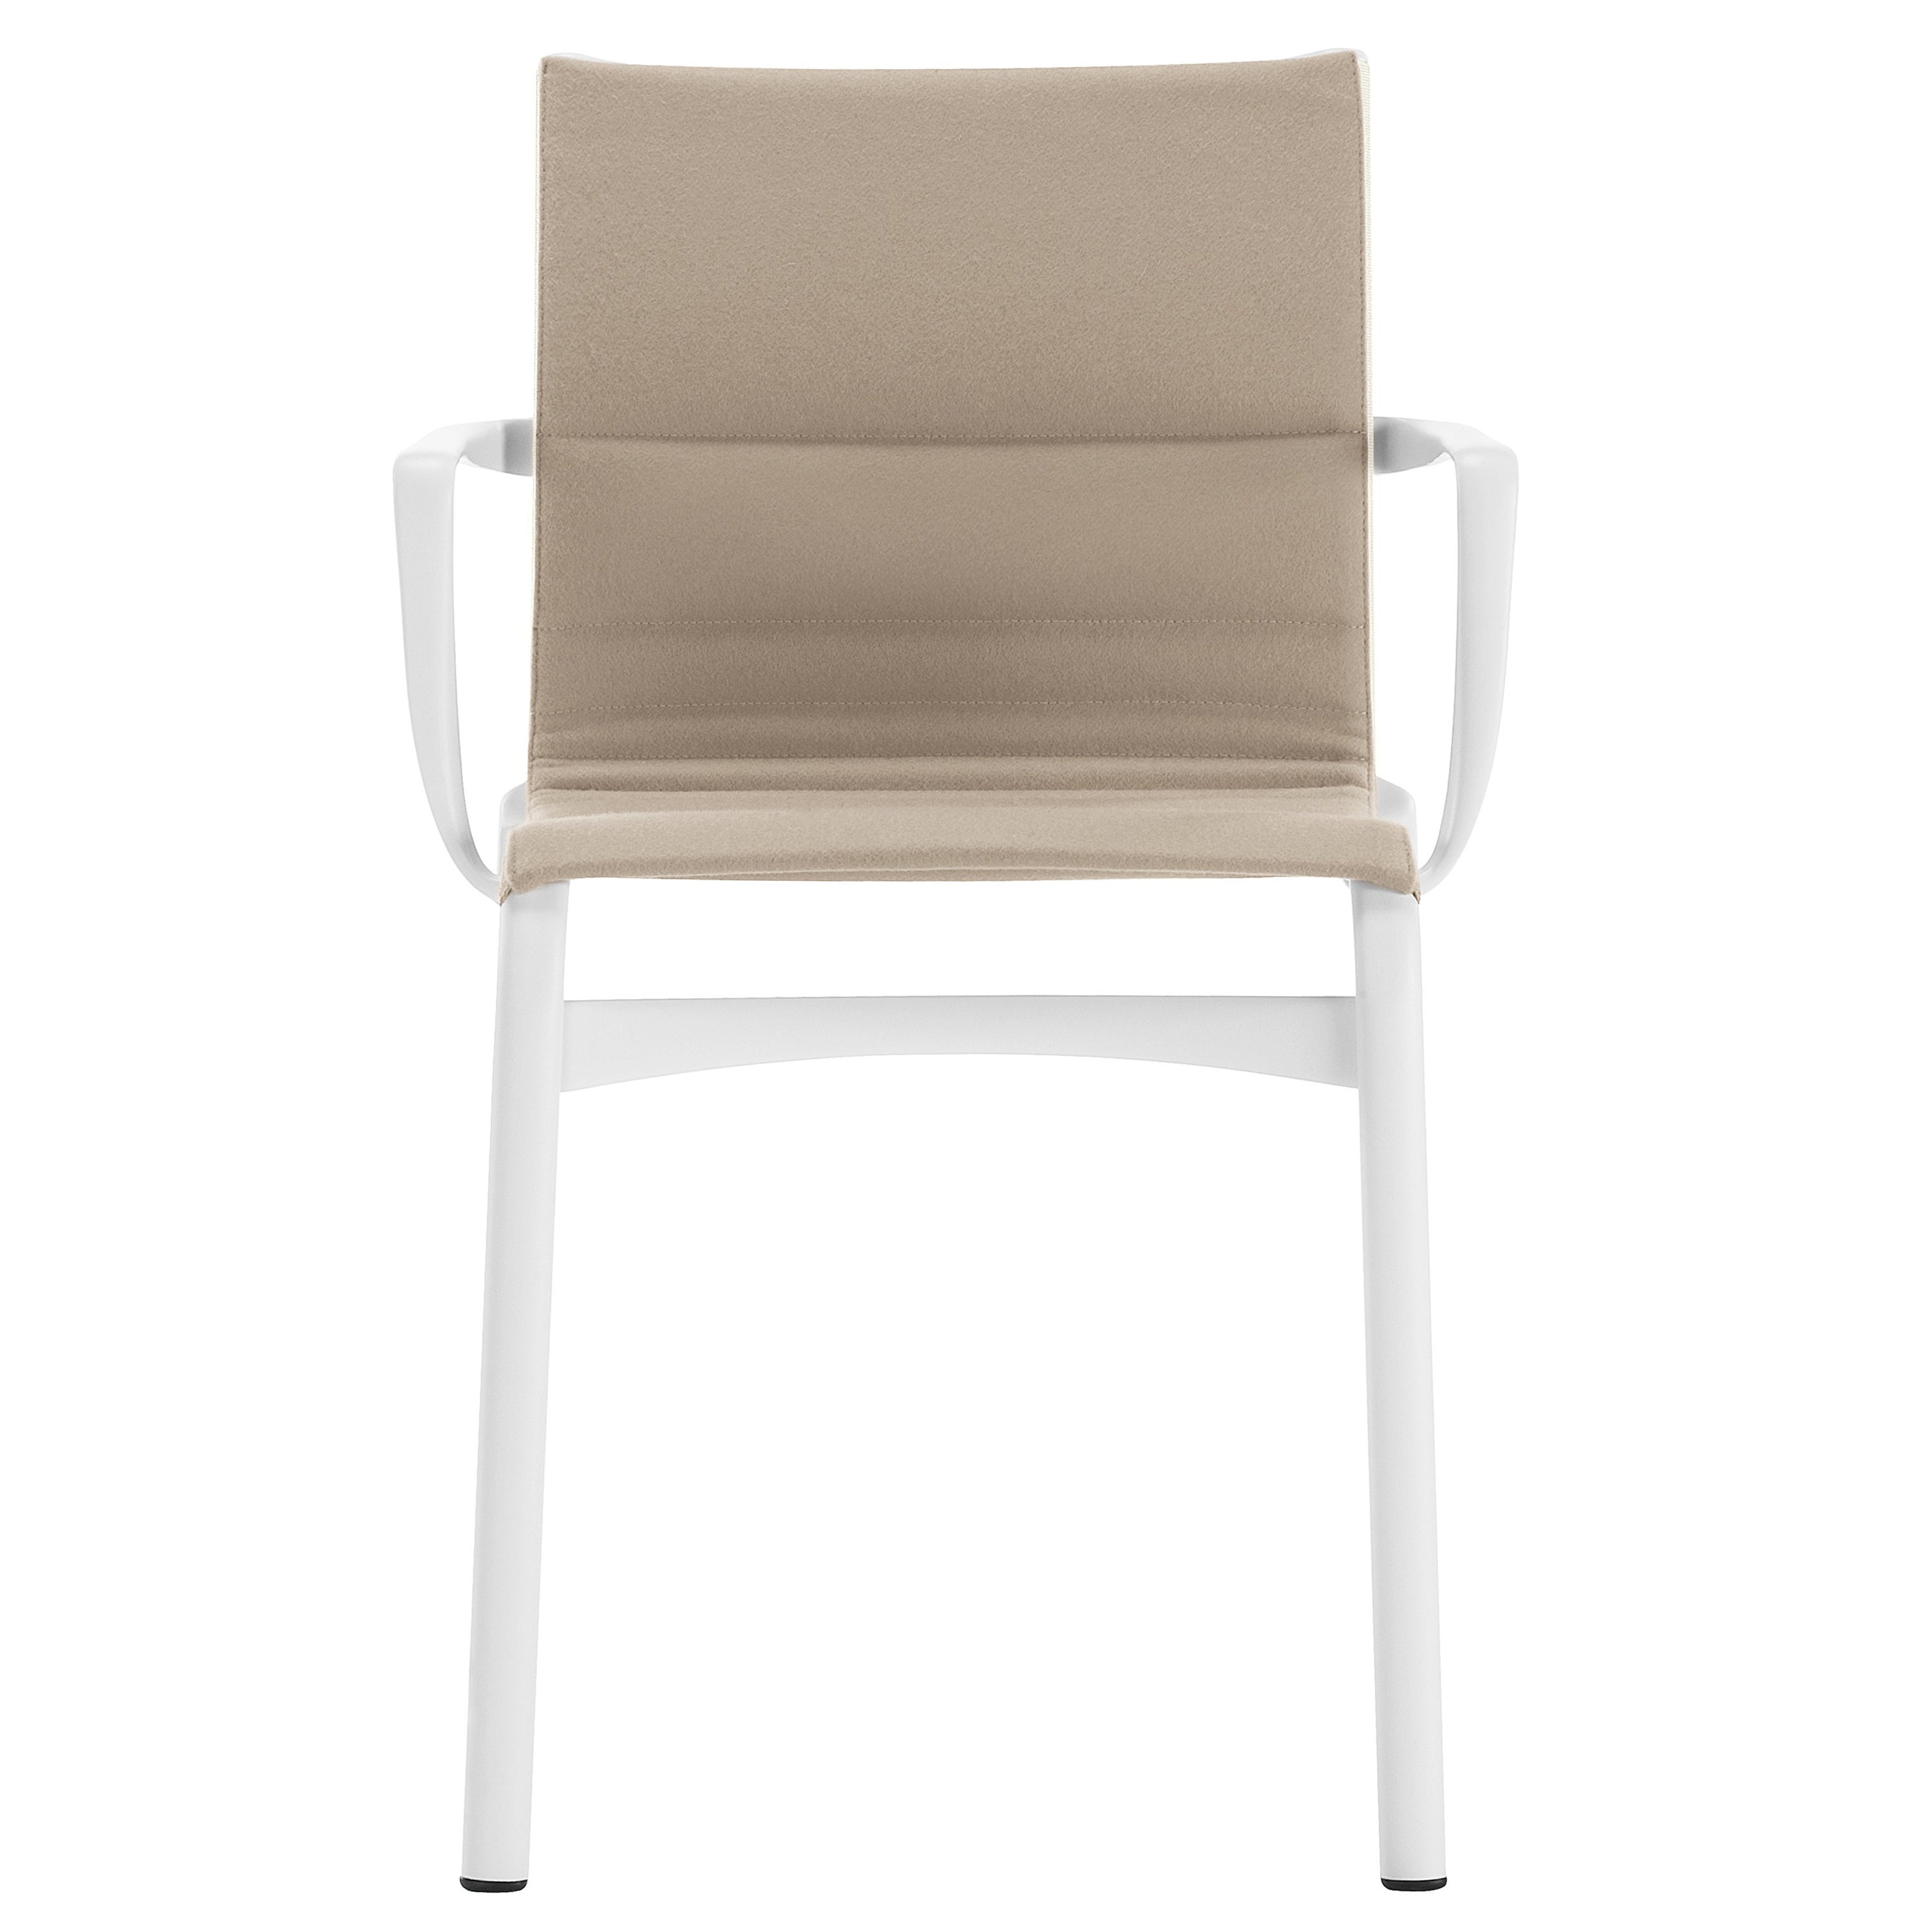 Alias 417 Highframe 40 Chair in Beige Seat with White Lacquered Aluminium Frame